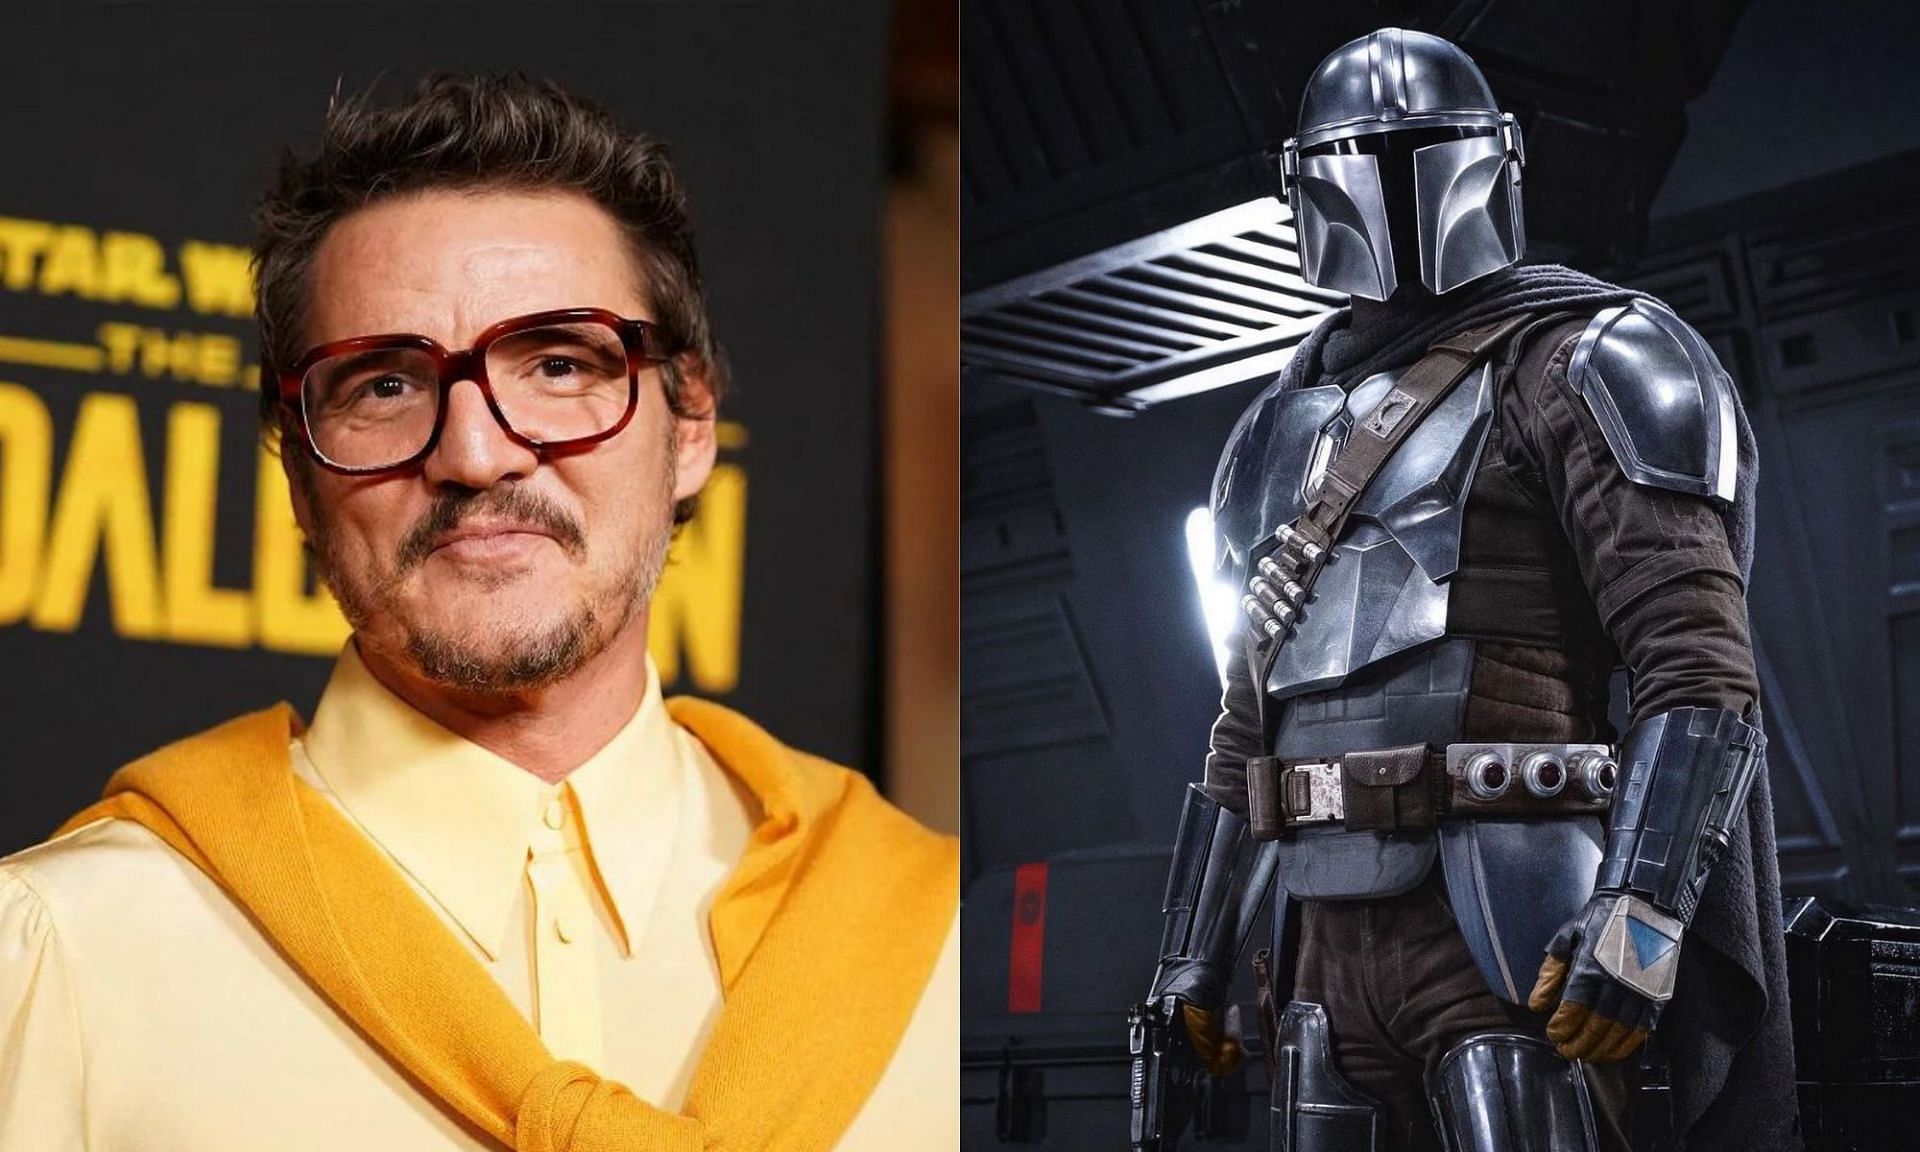 Pedro Pascal dishes out the full extent of his role in The Mandalorian (Images via Getty/Lucasfilm)